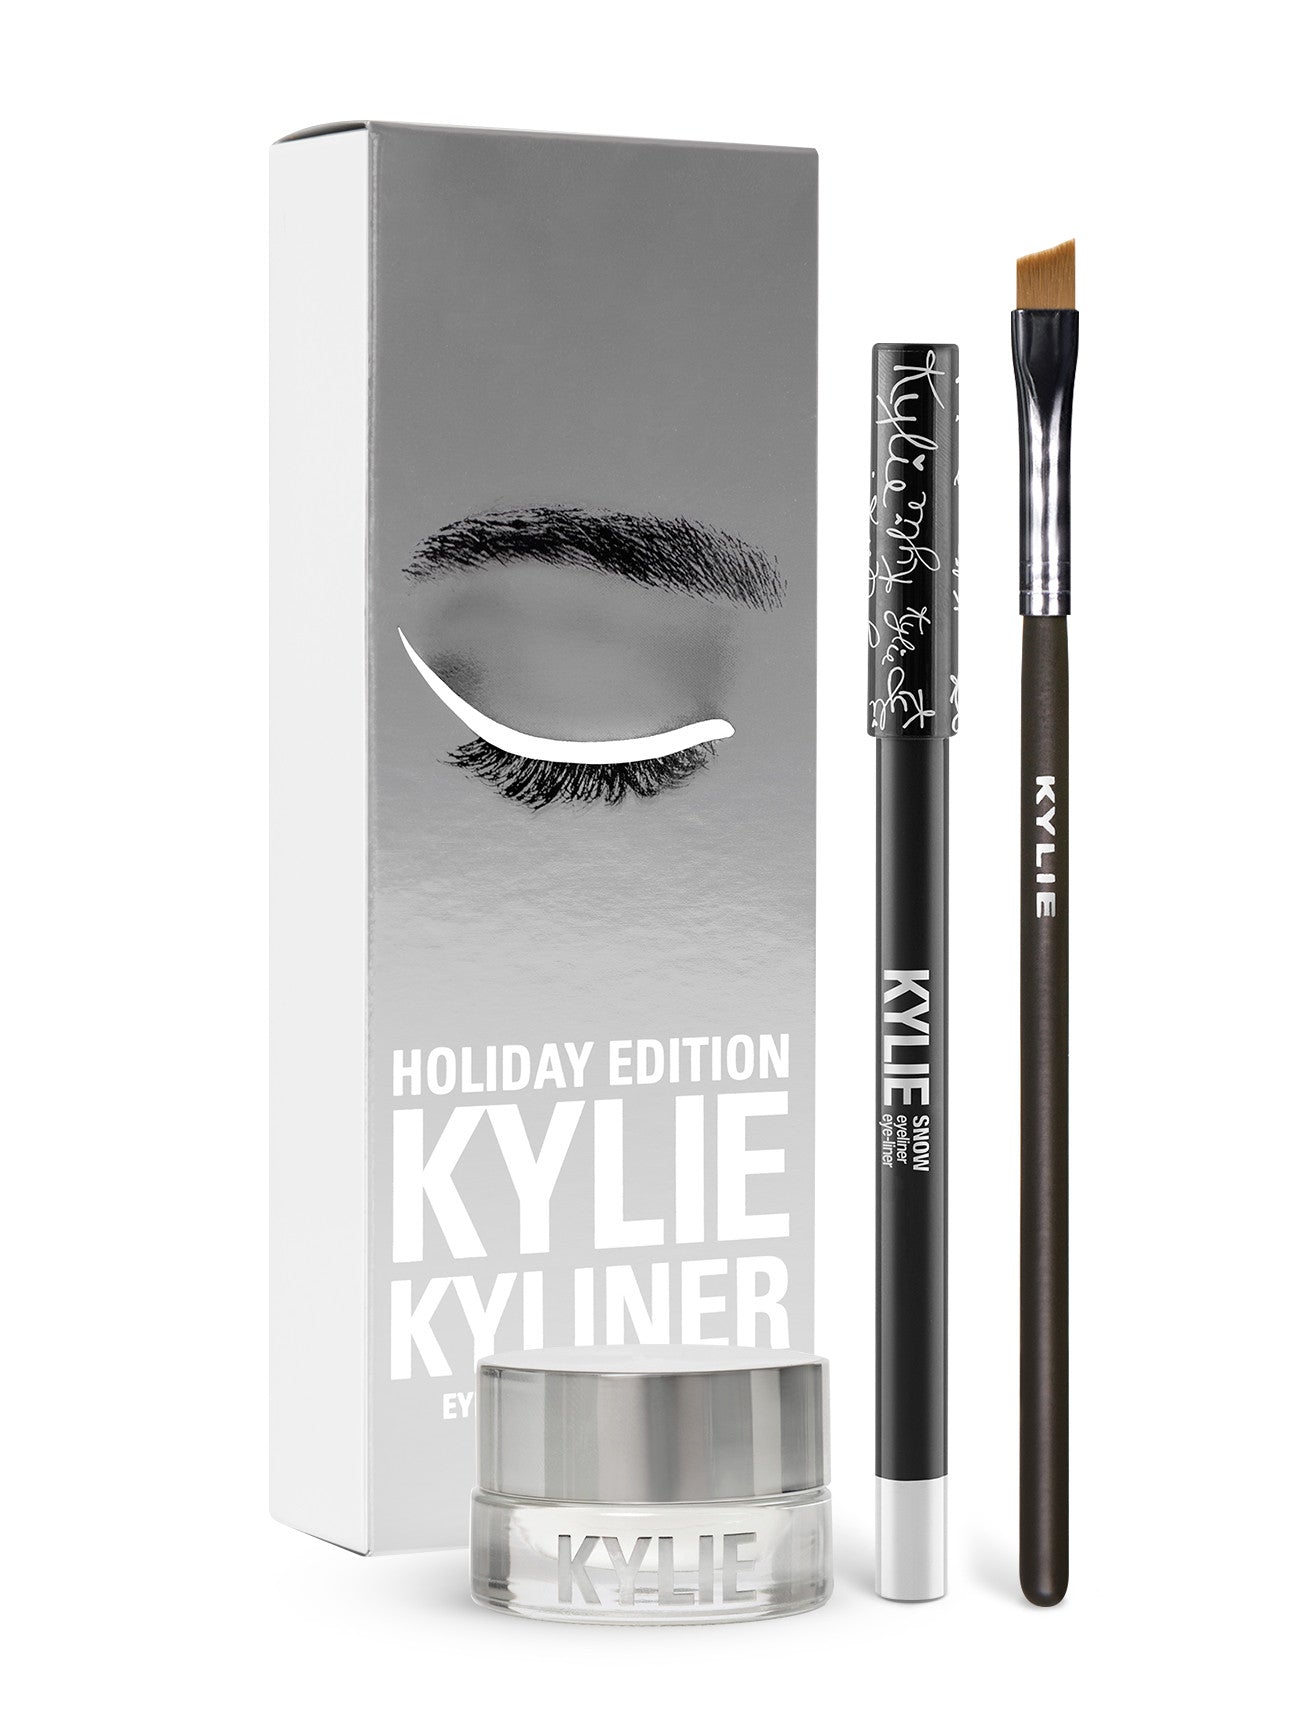 Kylie Holiday Edition Kyliner Kit Snow